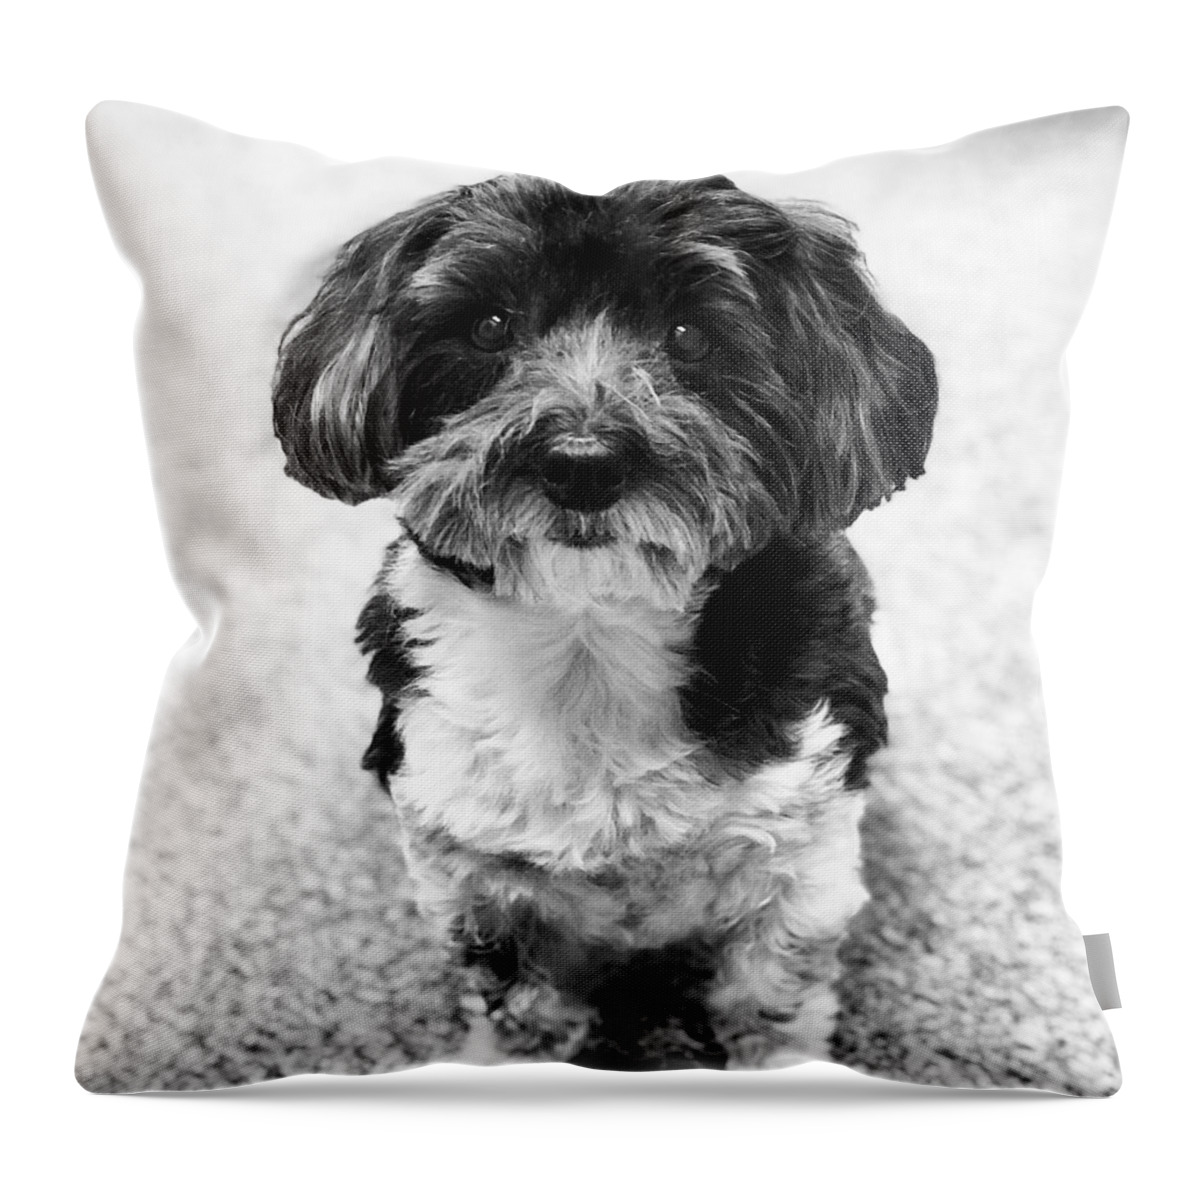  Throw Pillow featuring the digital art Reggie by Allie Maher